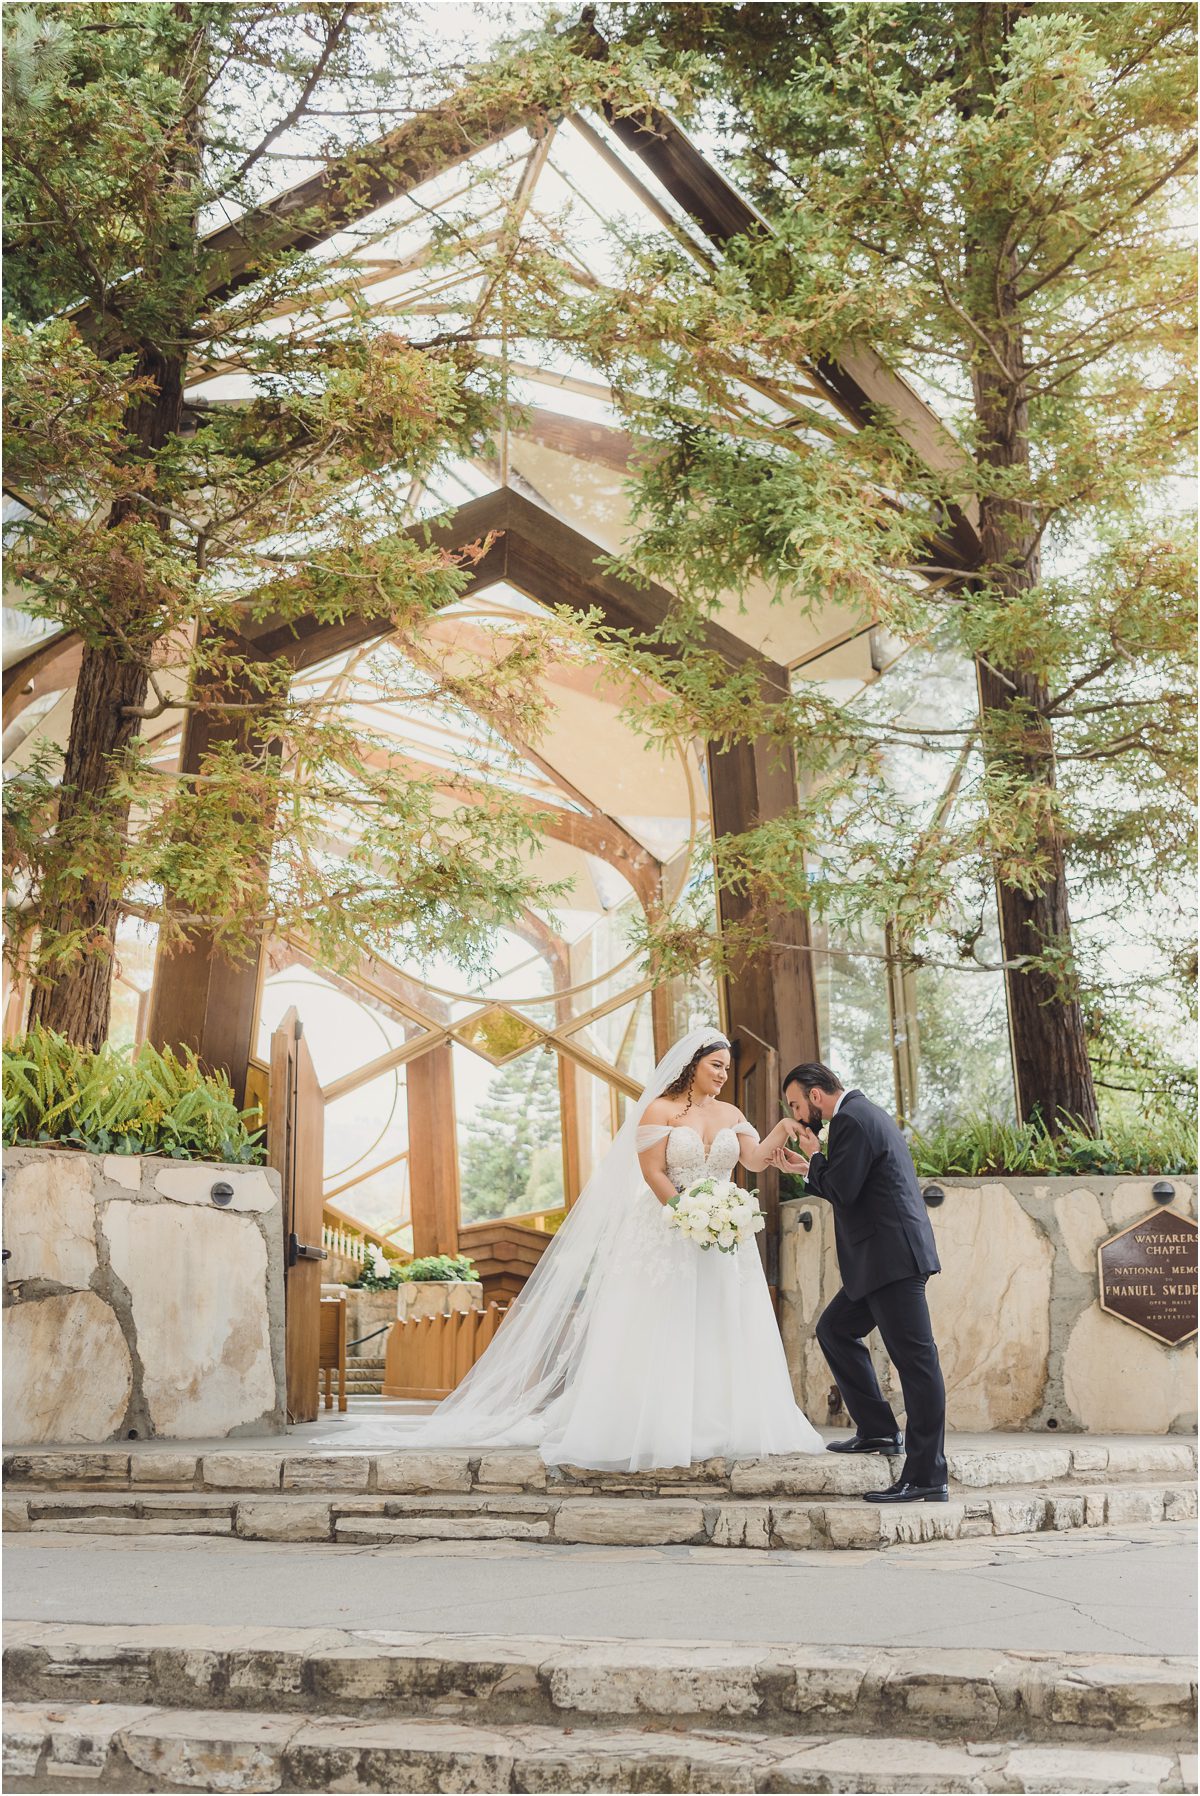 A Bride and Groom take a picture in front of Wayfarer's Chapel in Palos Verdes